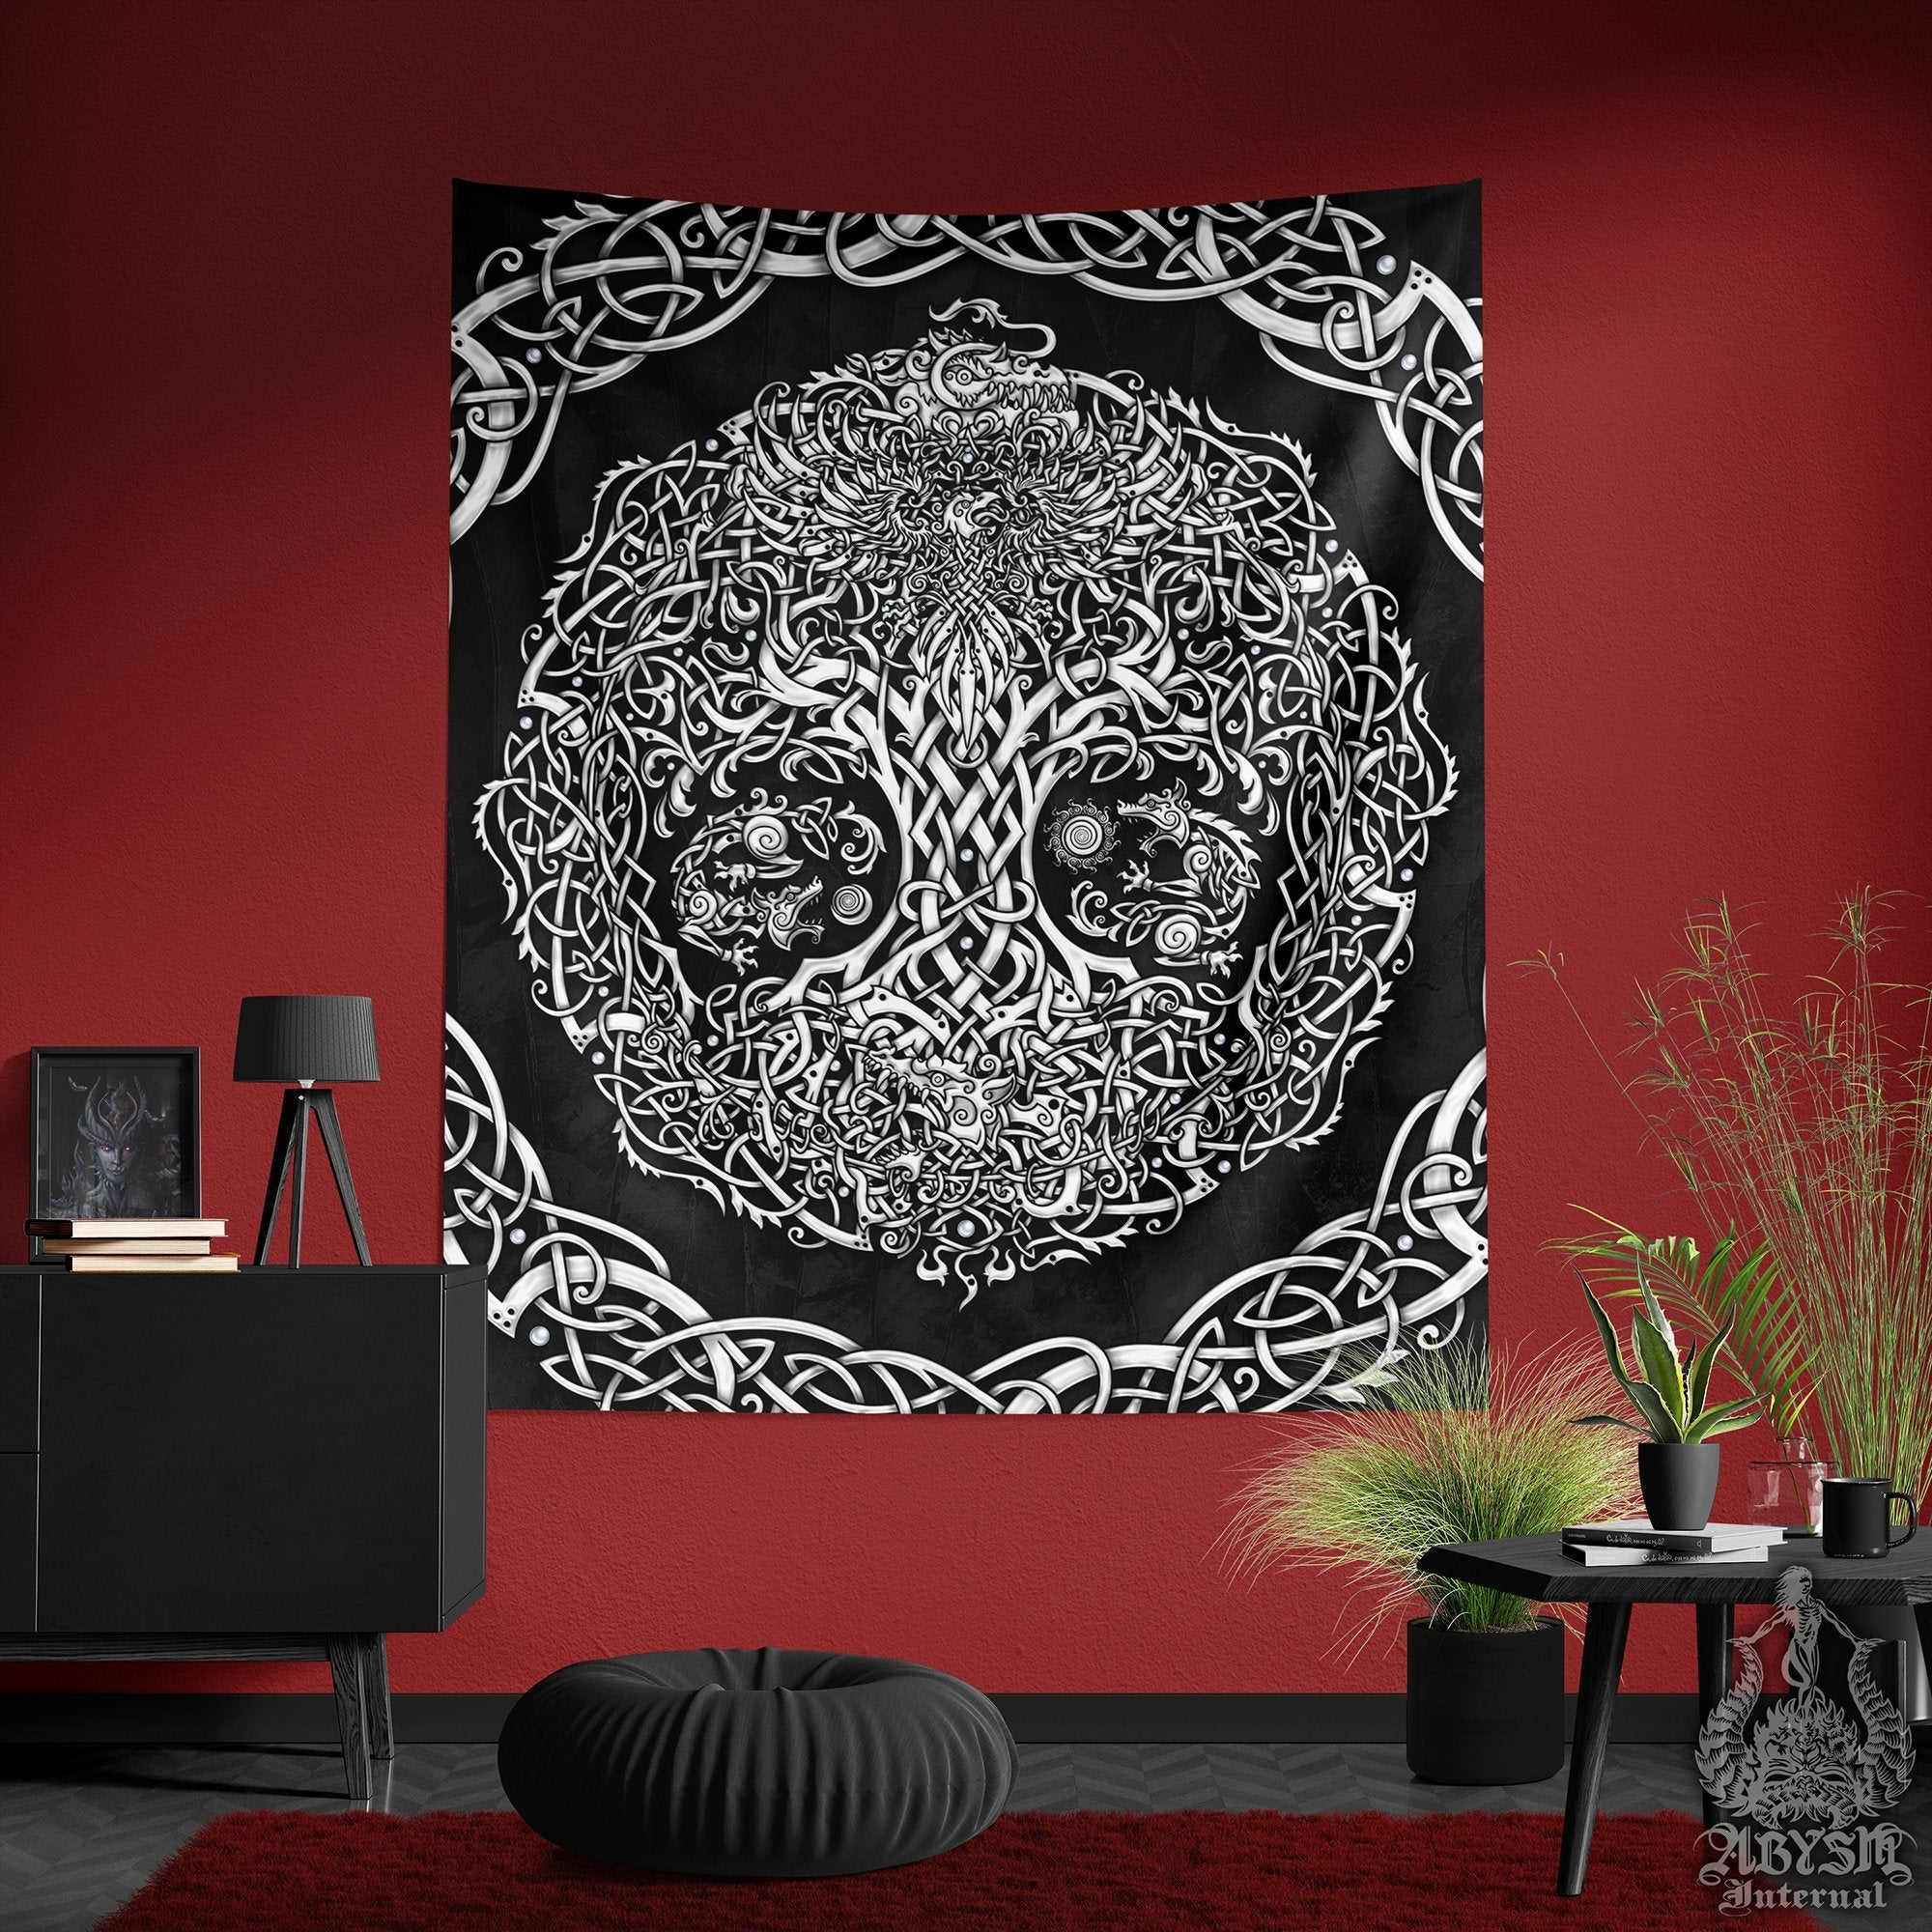 Yggdrasil Tapestry, Viking Wall Hanging, Pagan Home Decor, Norse Art Print, Nordic Tree of Life - White & 3 Colors - Abysm Internal